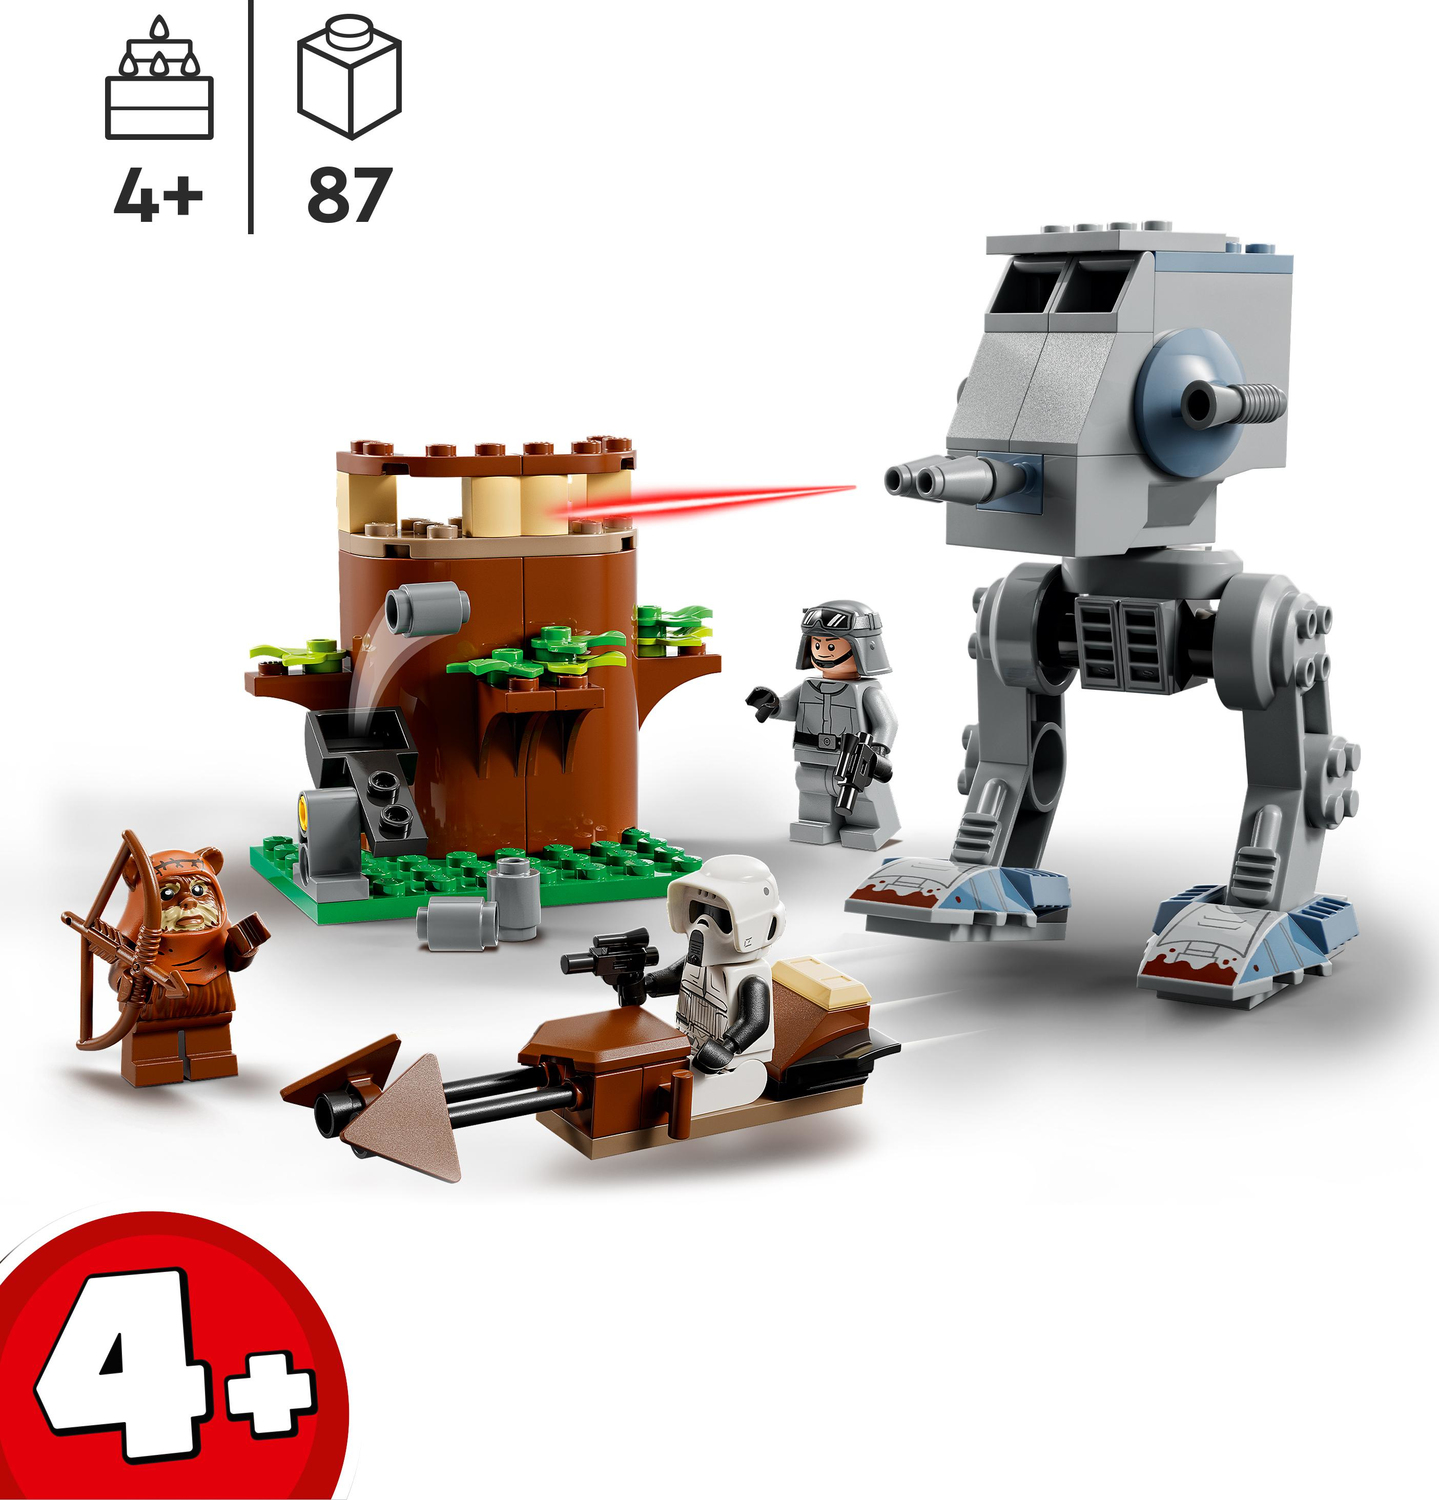 LEGO 75332 Star Wars AT-ST Buildable Toy